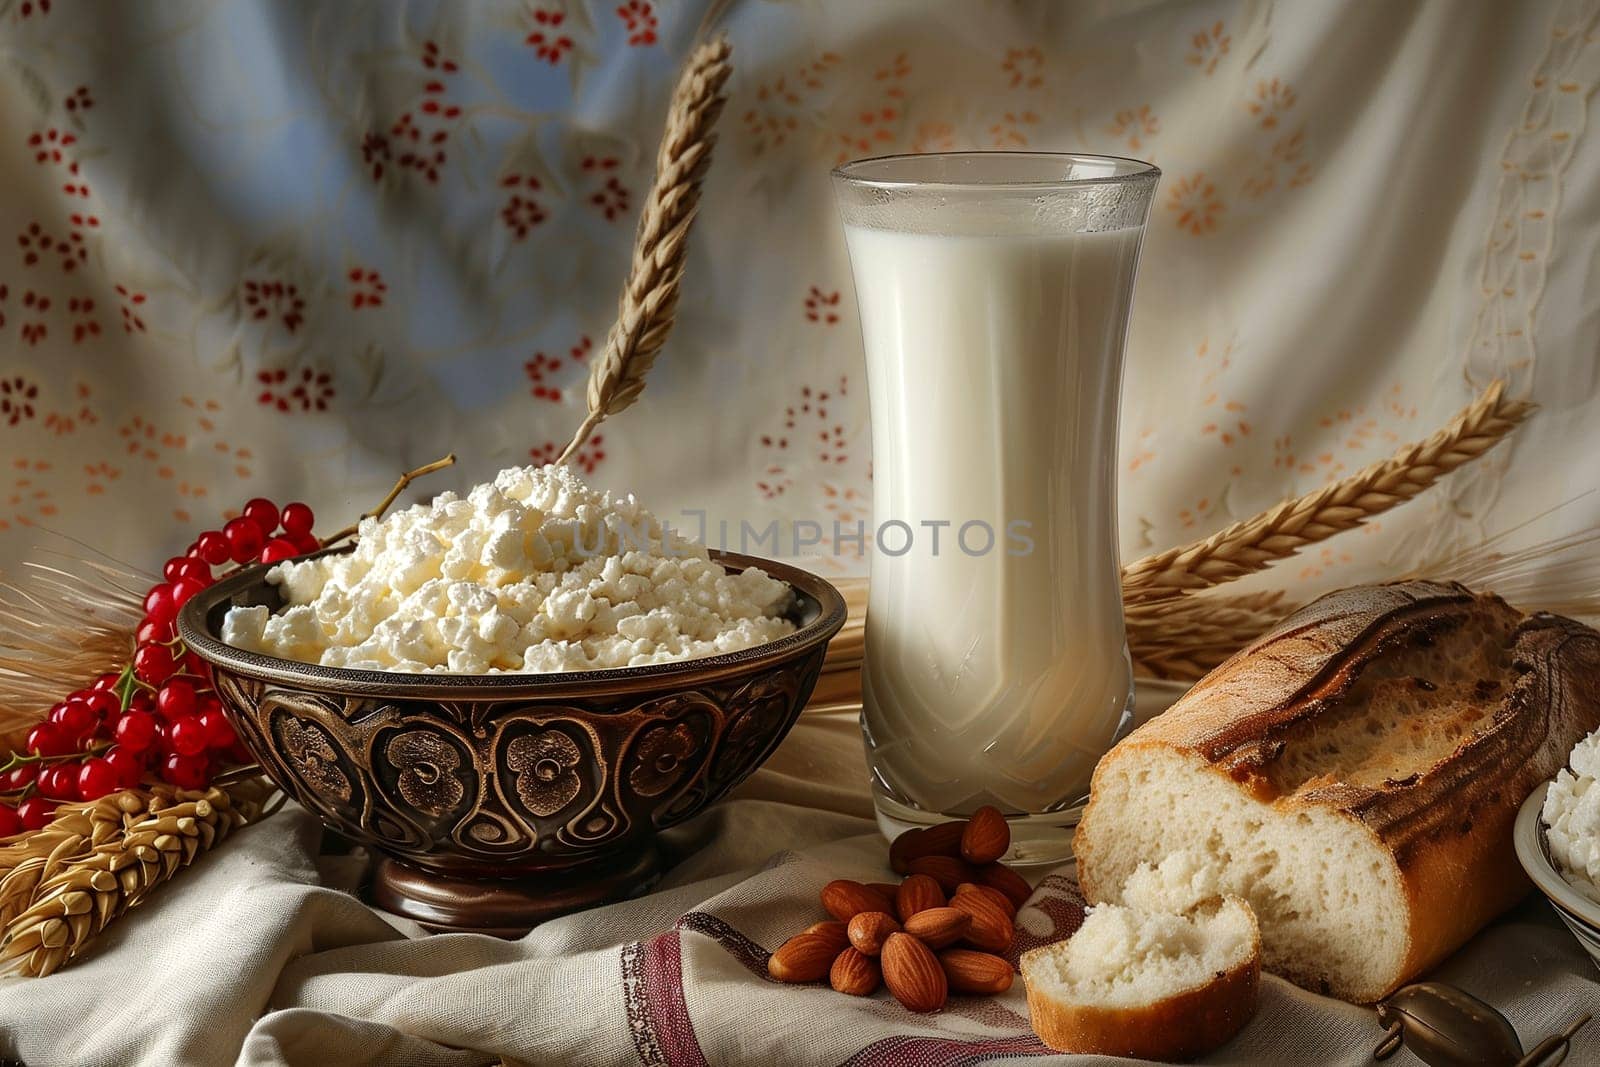 Table With Bowl of Food and Glass of Milk by Sd28DimoN_1976